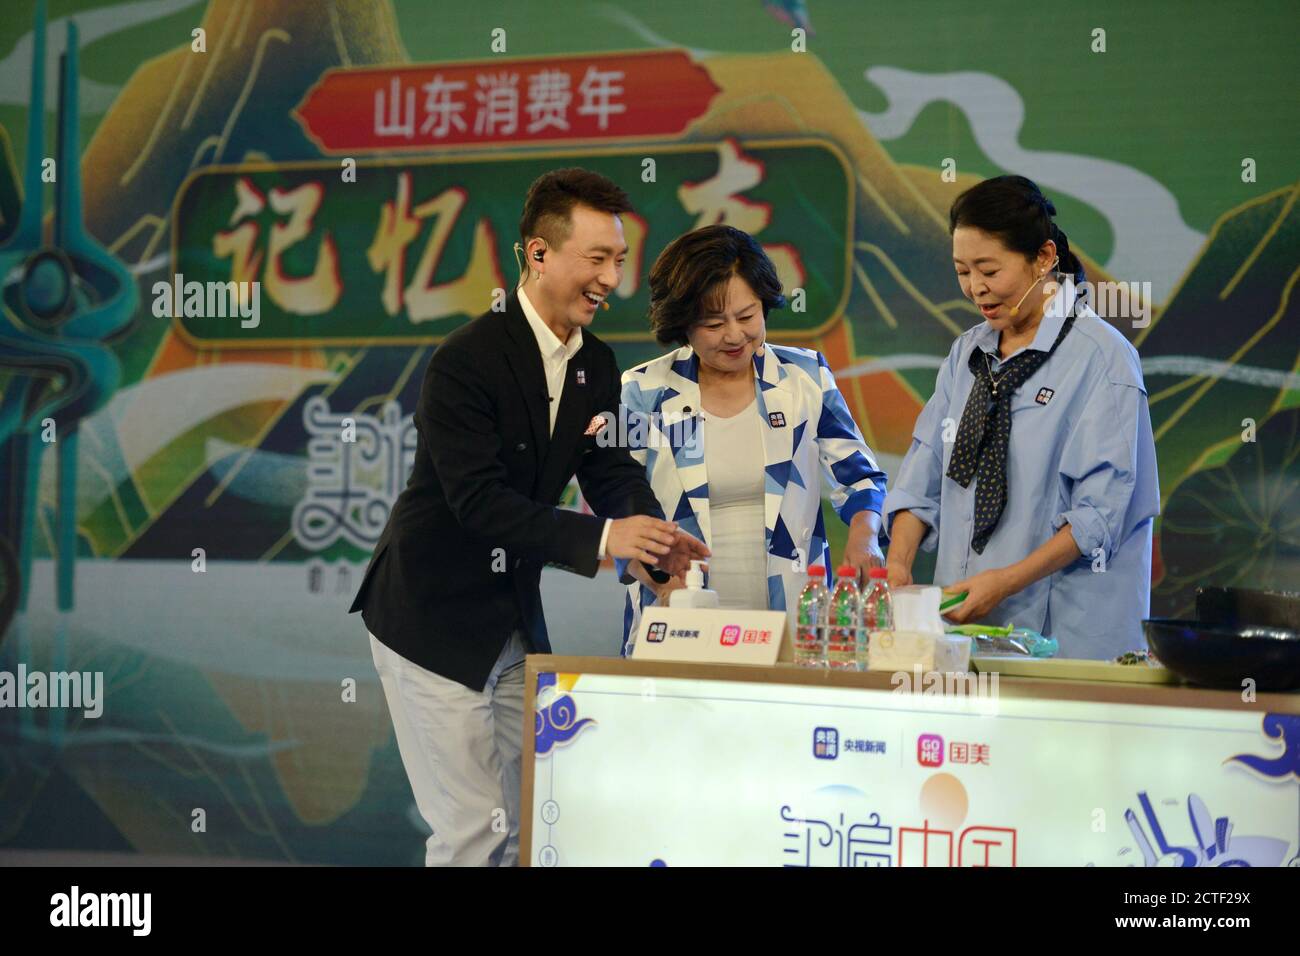 Chinese news anchor Kang Hui, left, Chinese film actress and TV host Ni Ping, right, and Chinese child program host Ju Ping, middle, together attend a Stock Photo